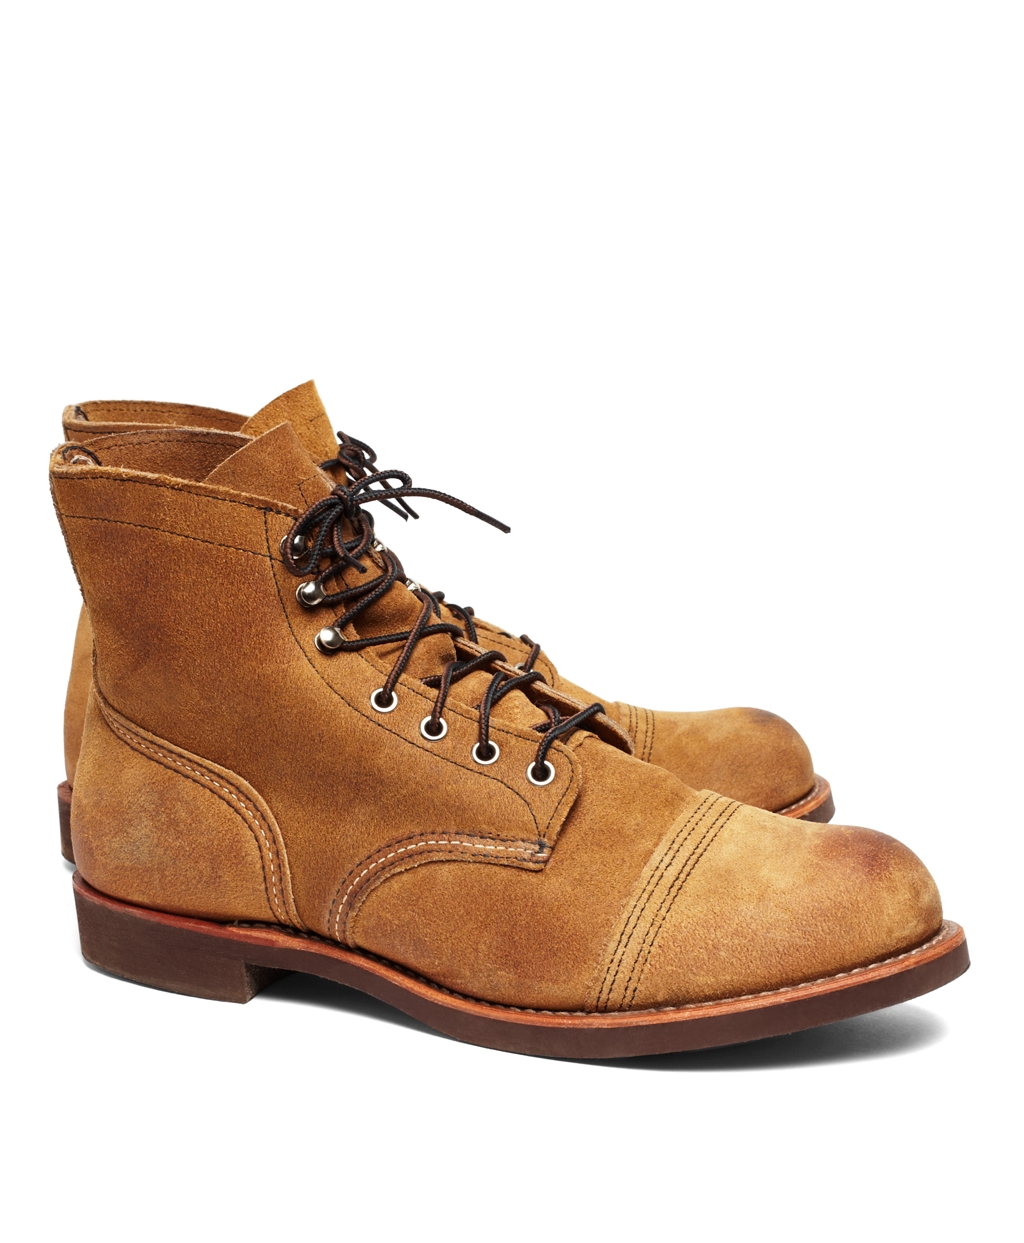 Lyst - Brooks Brothers Red Wing 8113 Hawthorne Muleskinner in Brown for Men